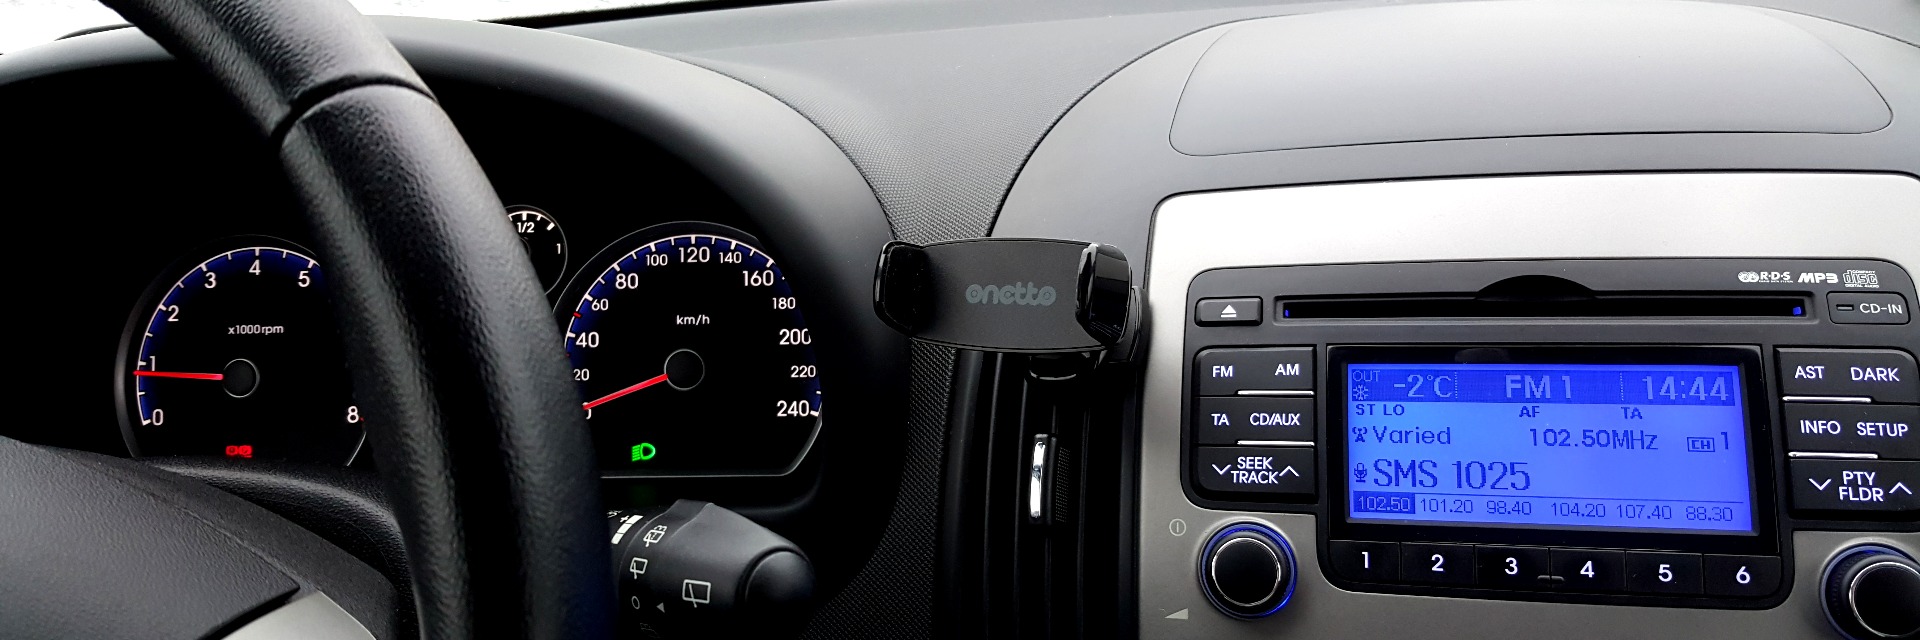 Onetto Easy One Handed Air Vent